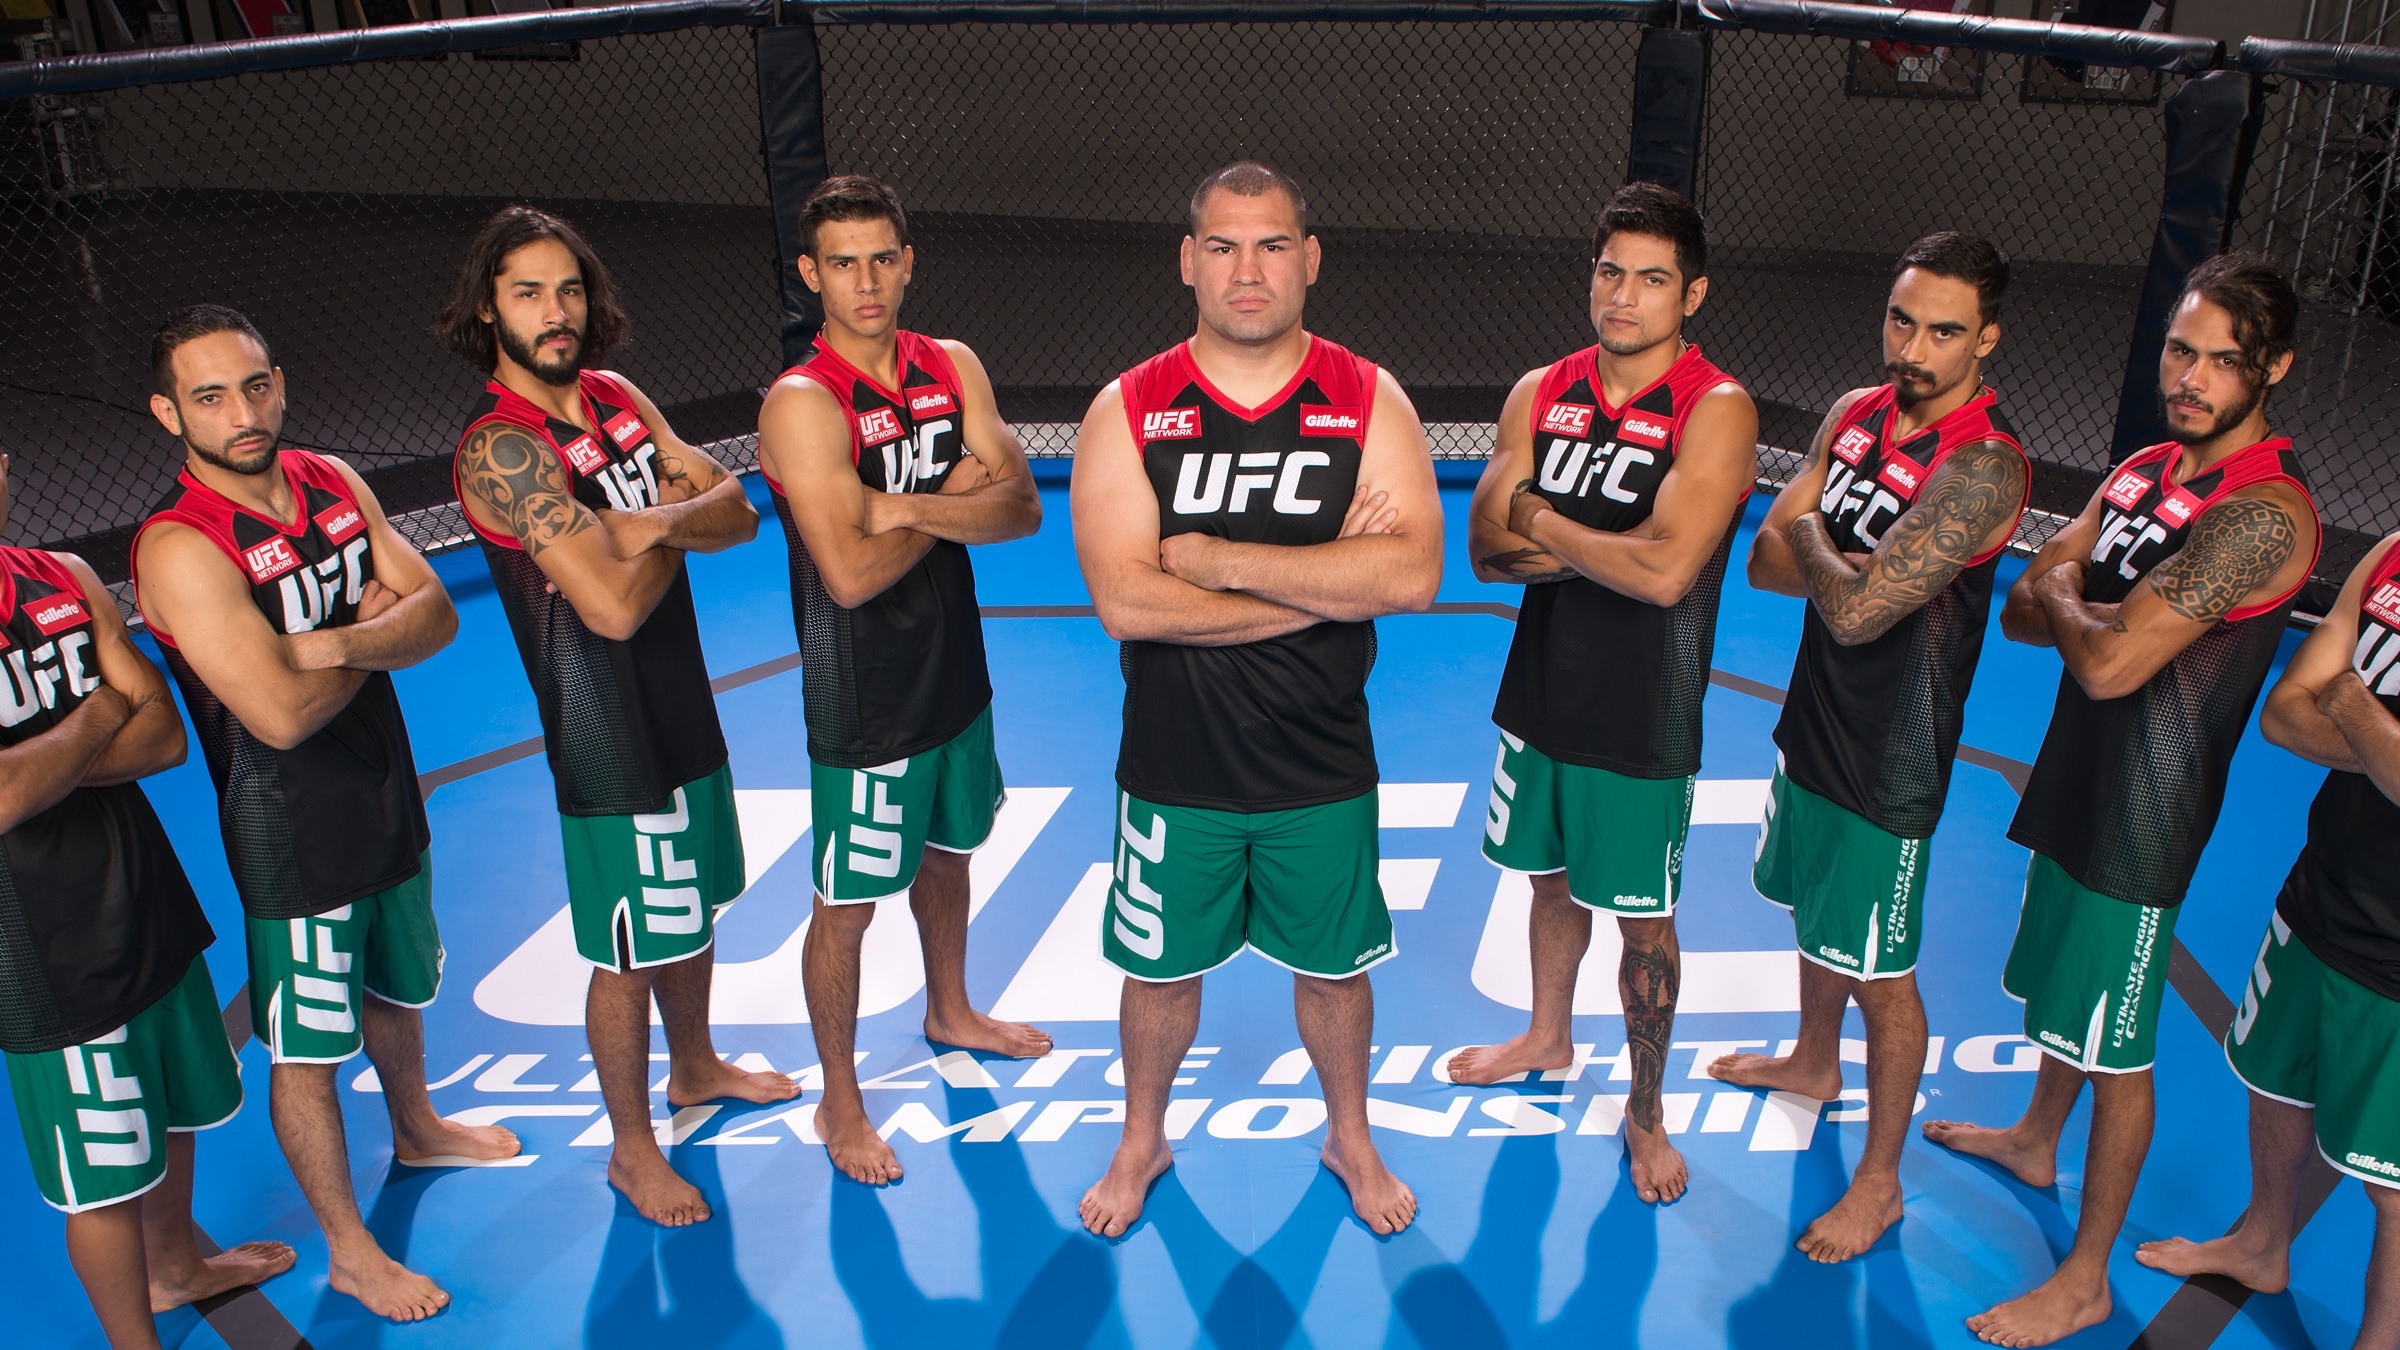 How to watch The Ultimate Fighter season 31 online…